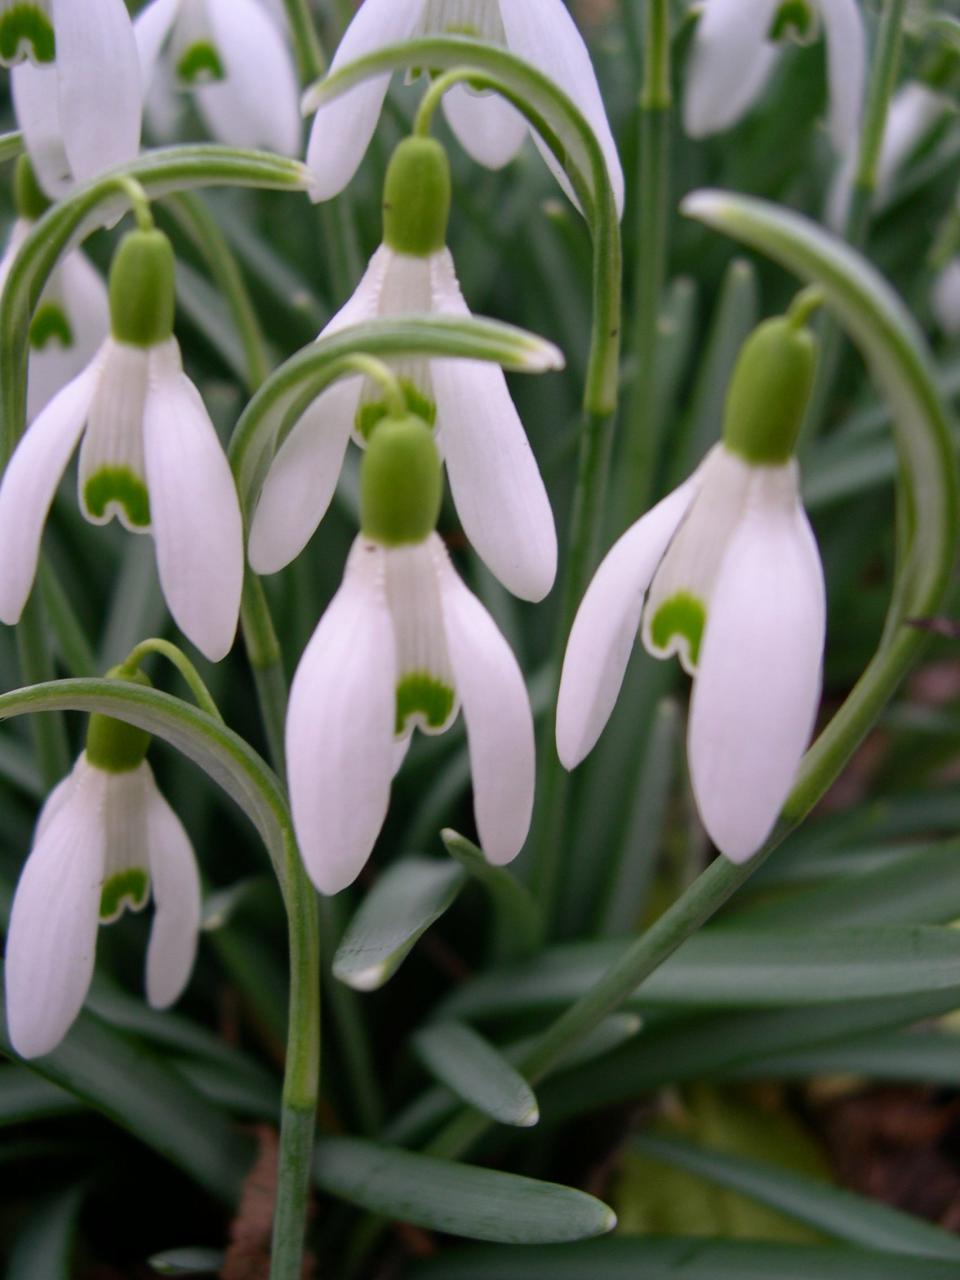 The low chill requirement of Snow Drops makes their bloom time vary widely in response to winter warm spells but once in bloom can withstand temperatures well below freezing.